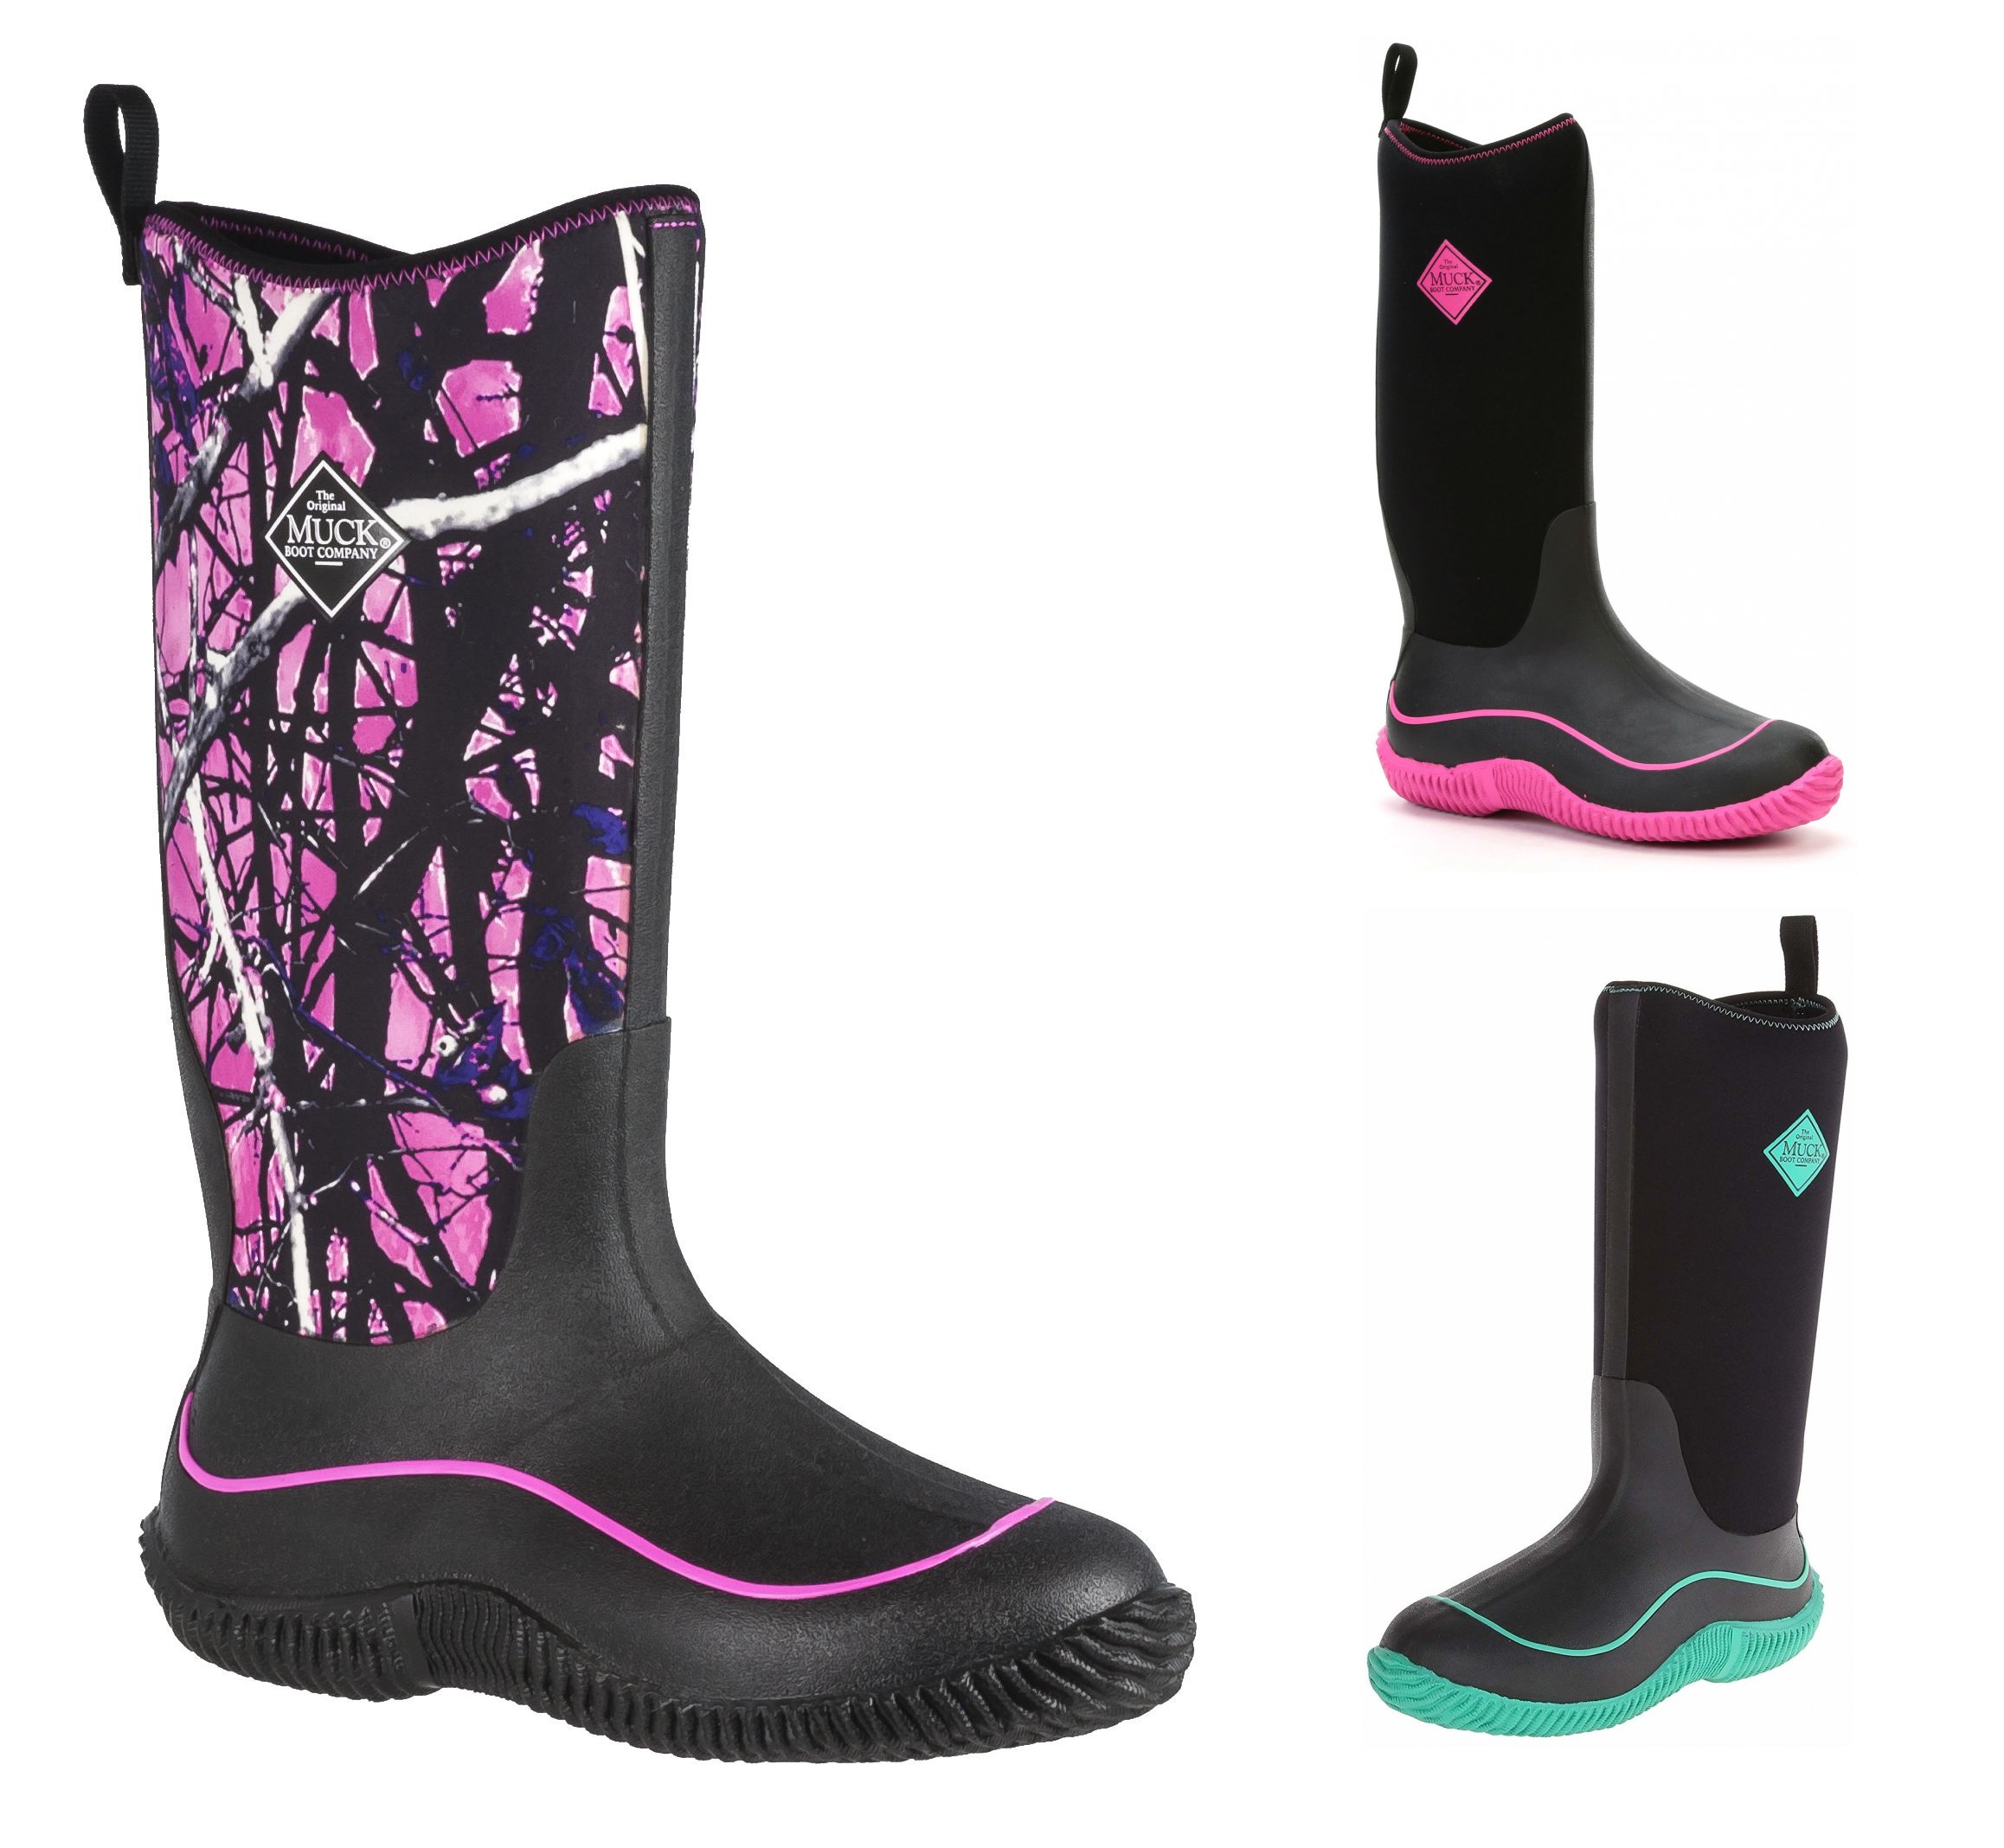 teal camo muck boots